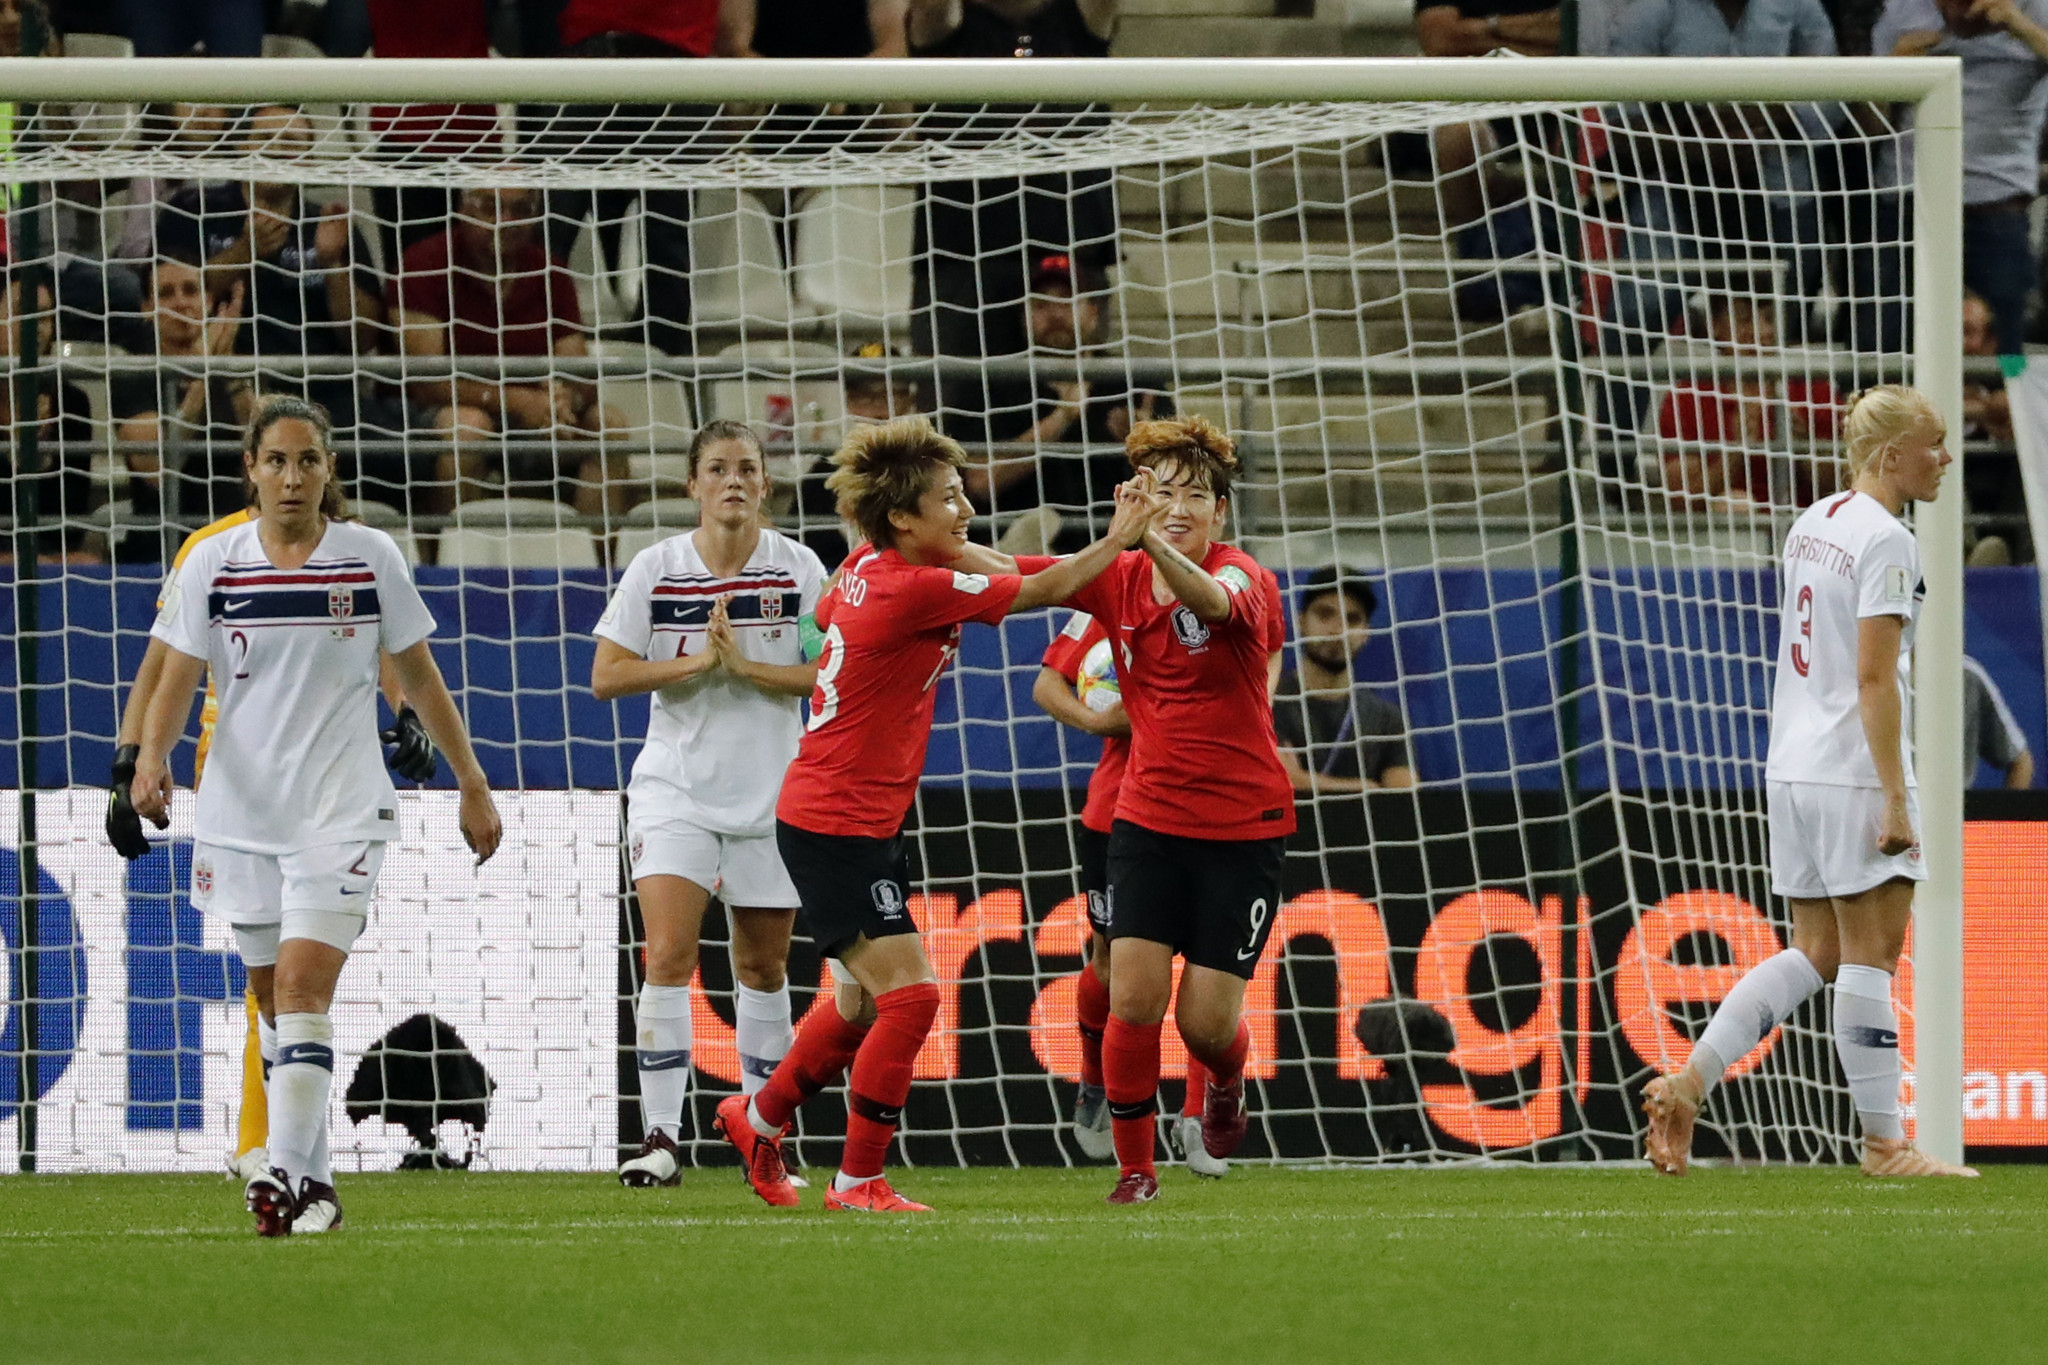 Yeo Min-ji, centre left, pulled one back for South Korea but it proved only a consolation ©Getty Images